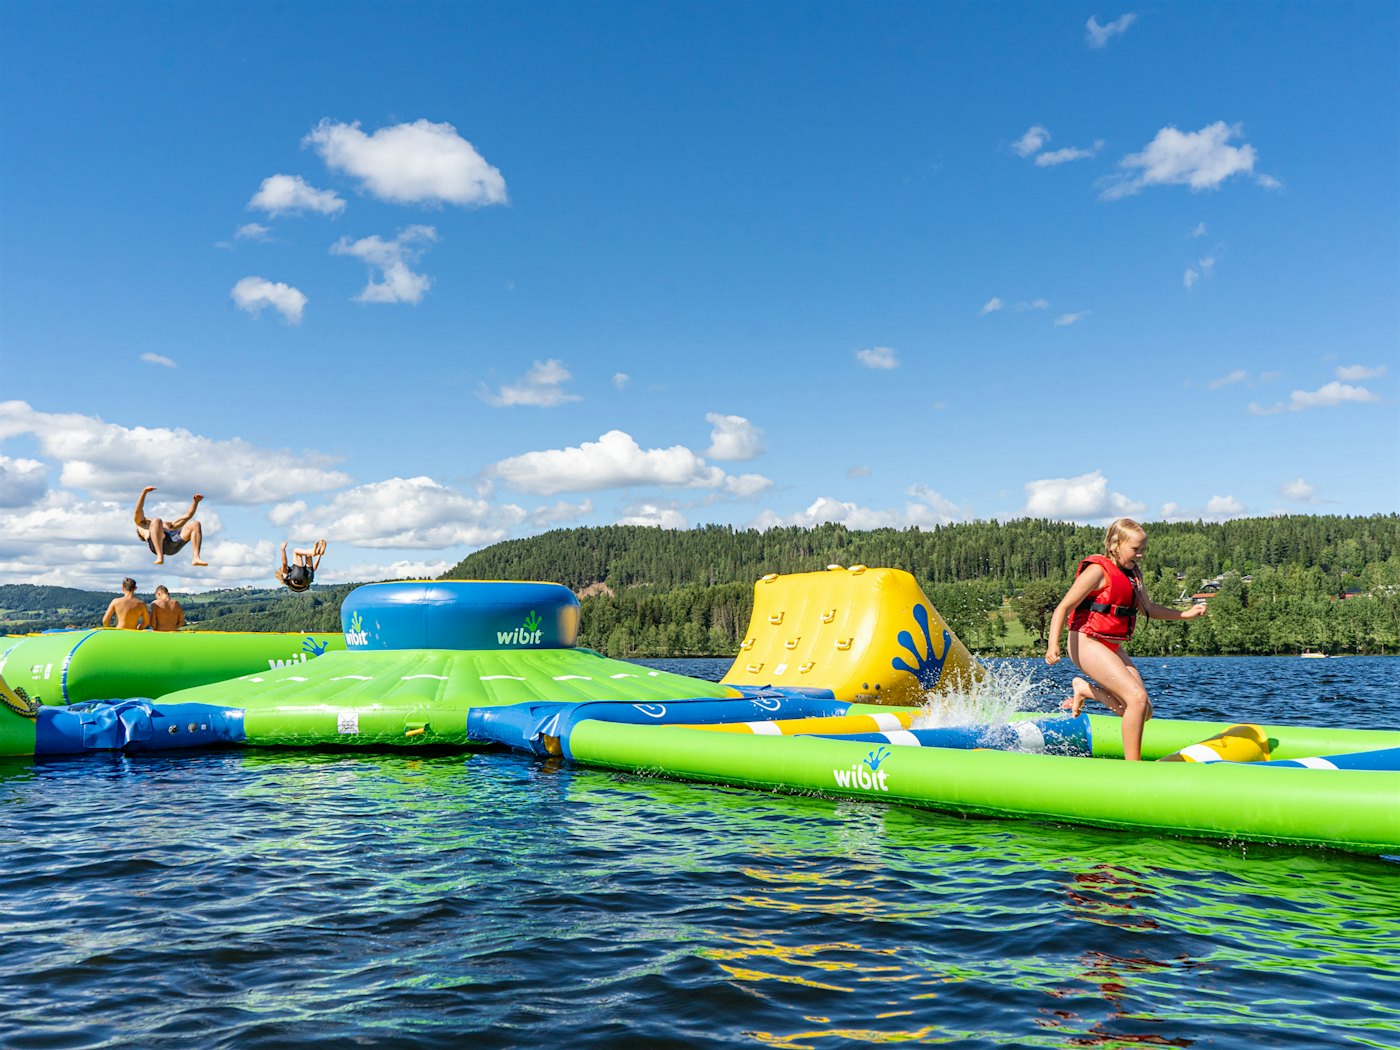 Children play and have fun at the floating water park in Mjøsa.